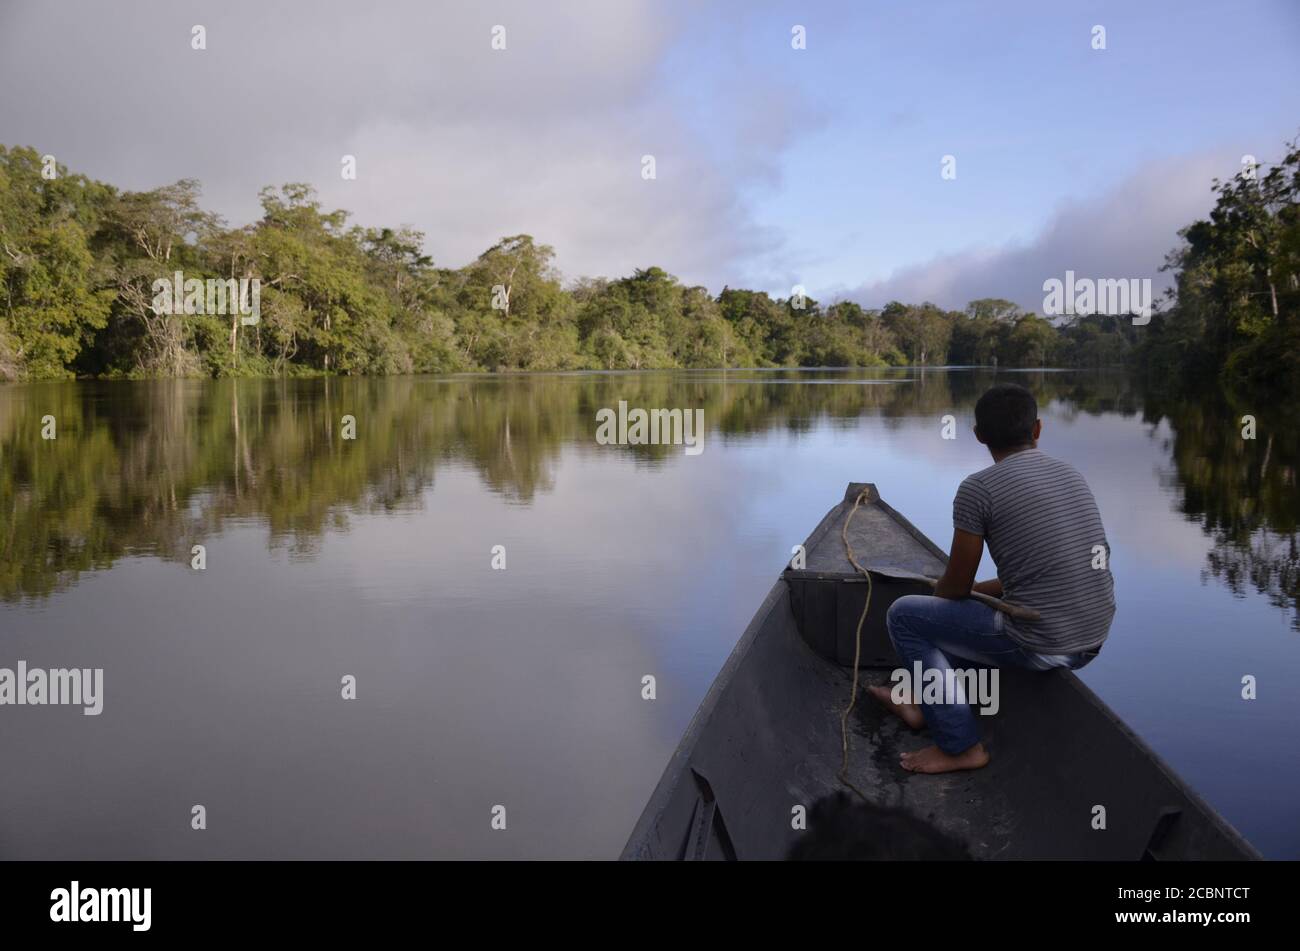 Man on boat at the jungle Stock Photo